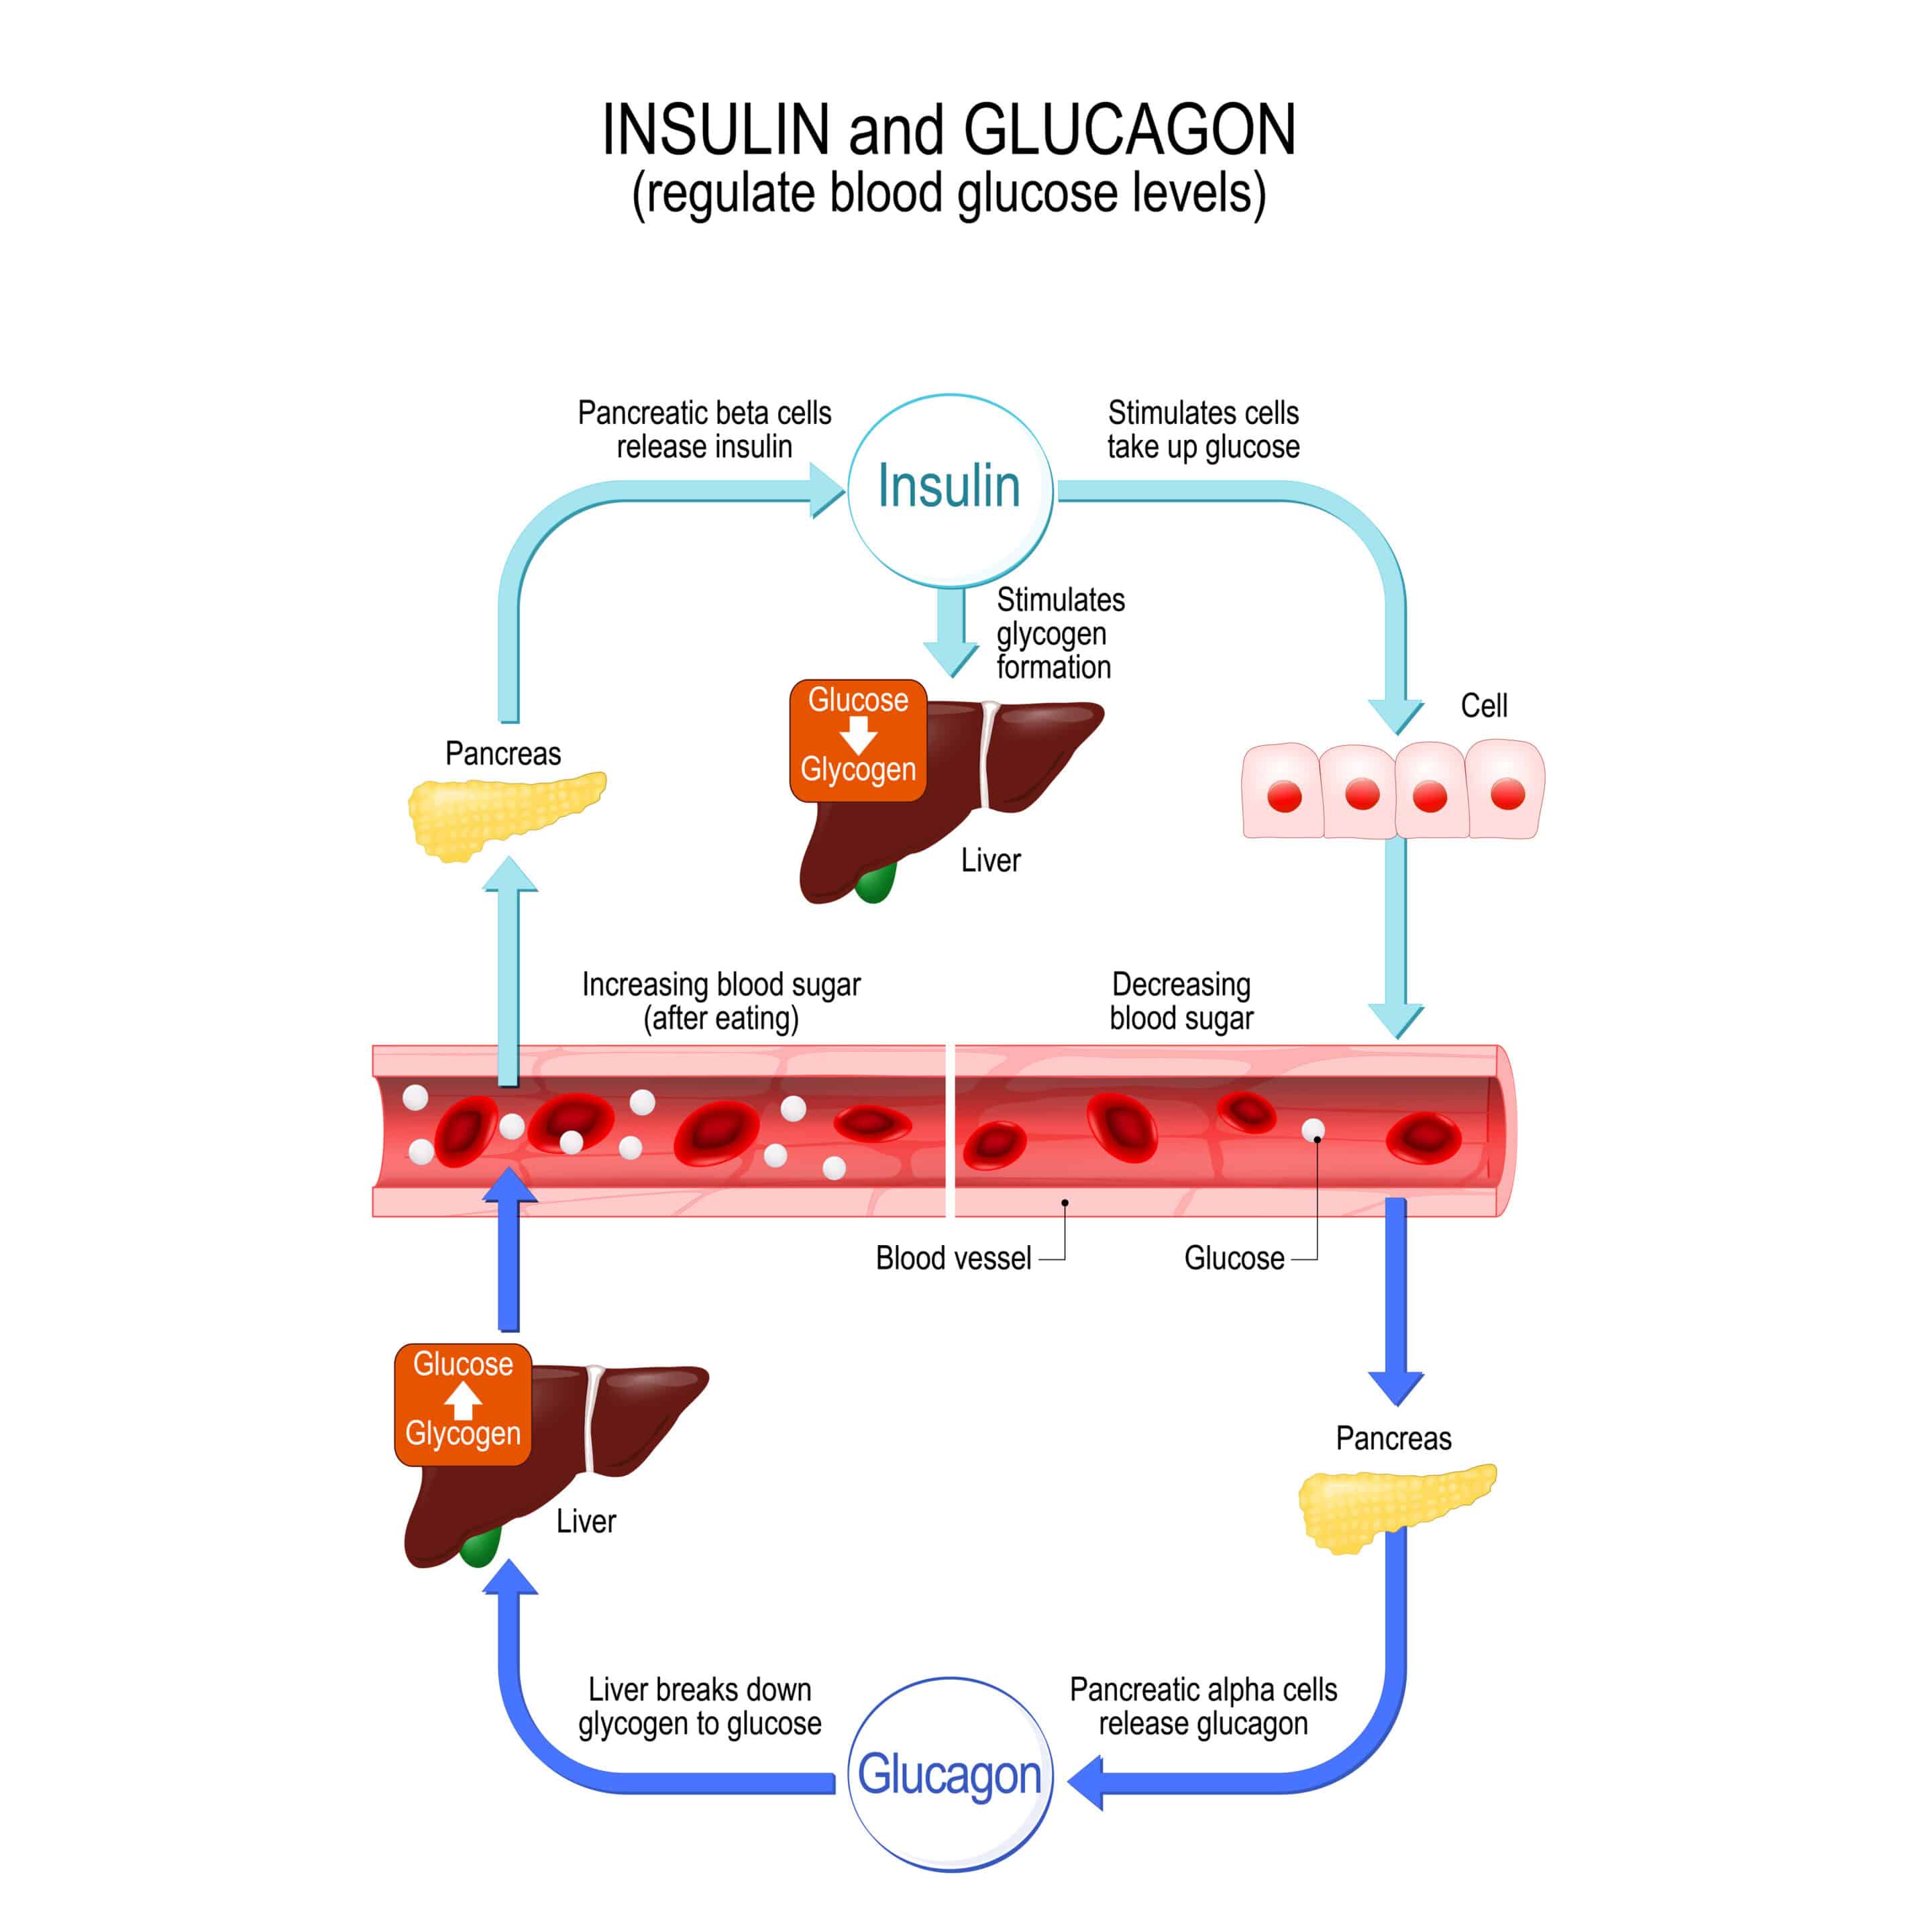 Glucagon vs insulin. Showing how they both regulate blood glucose levels in the liver and pancreas